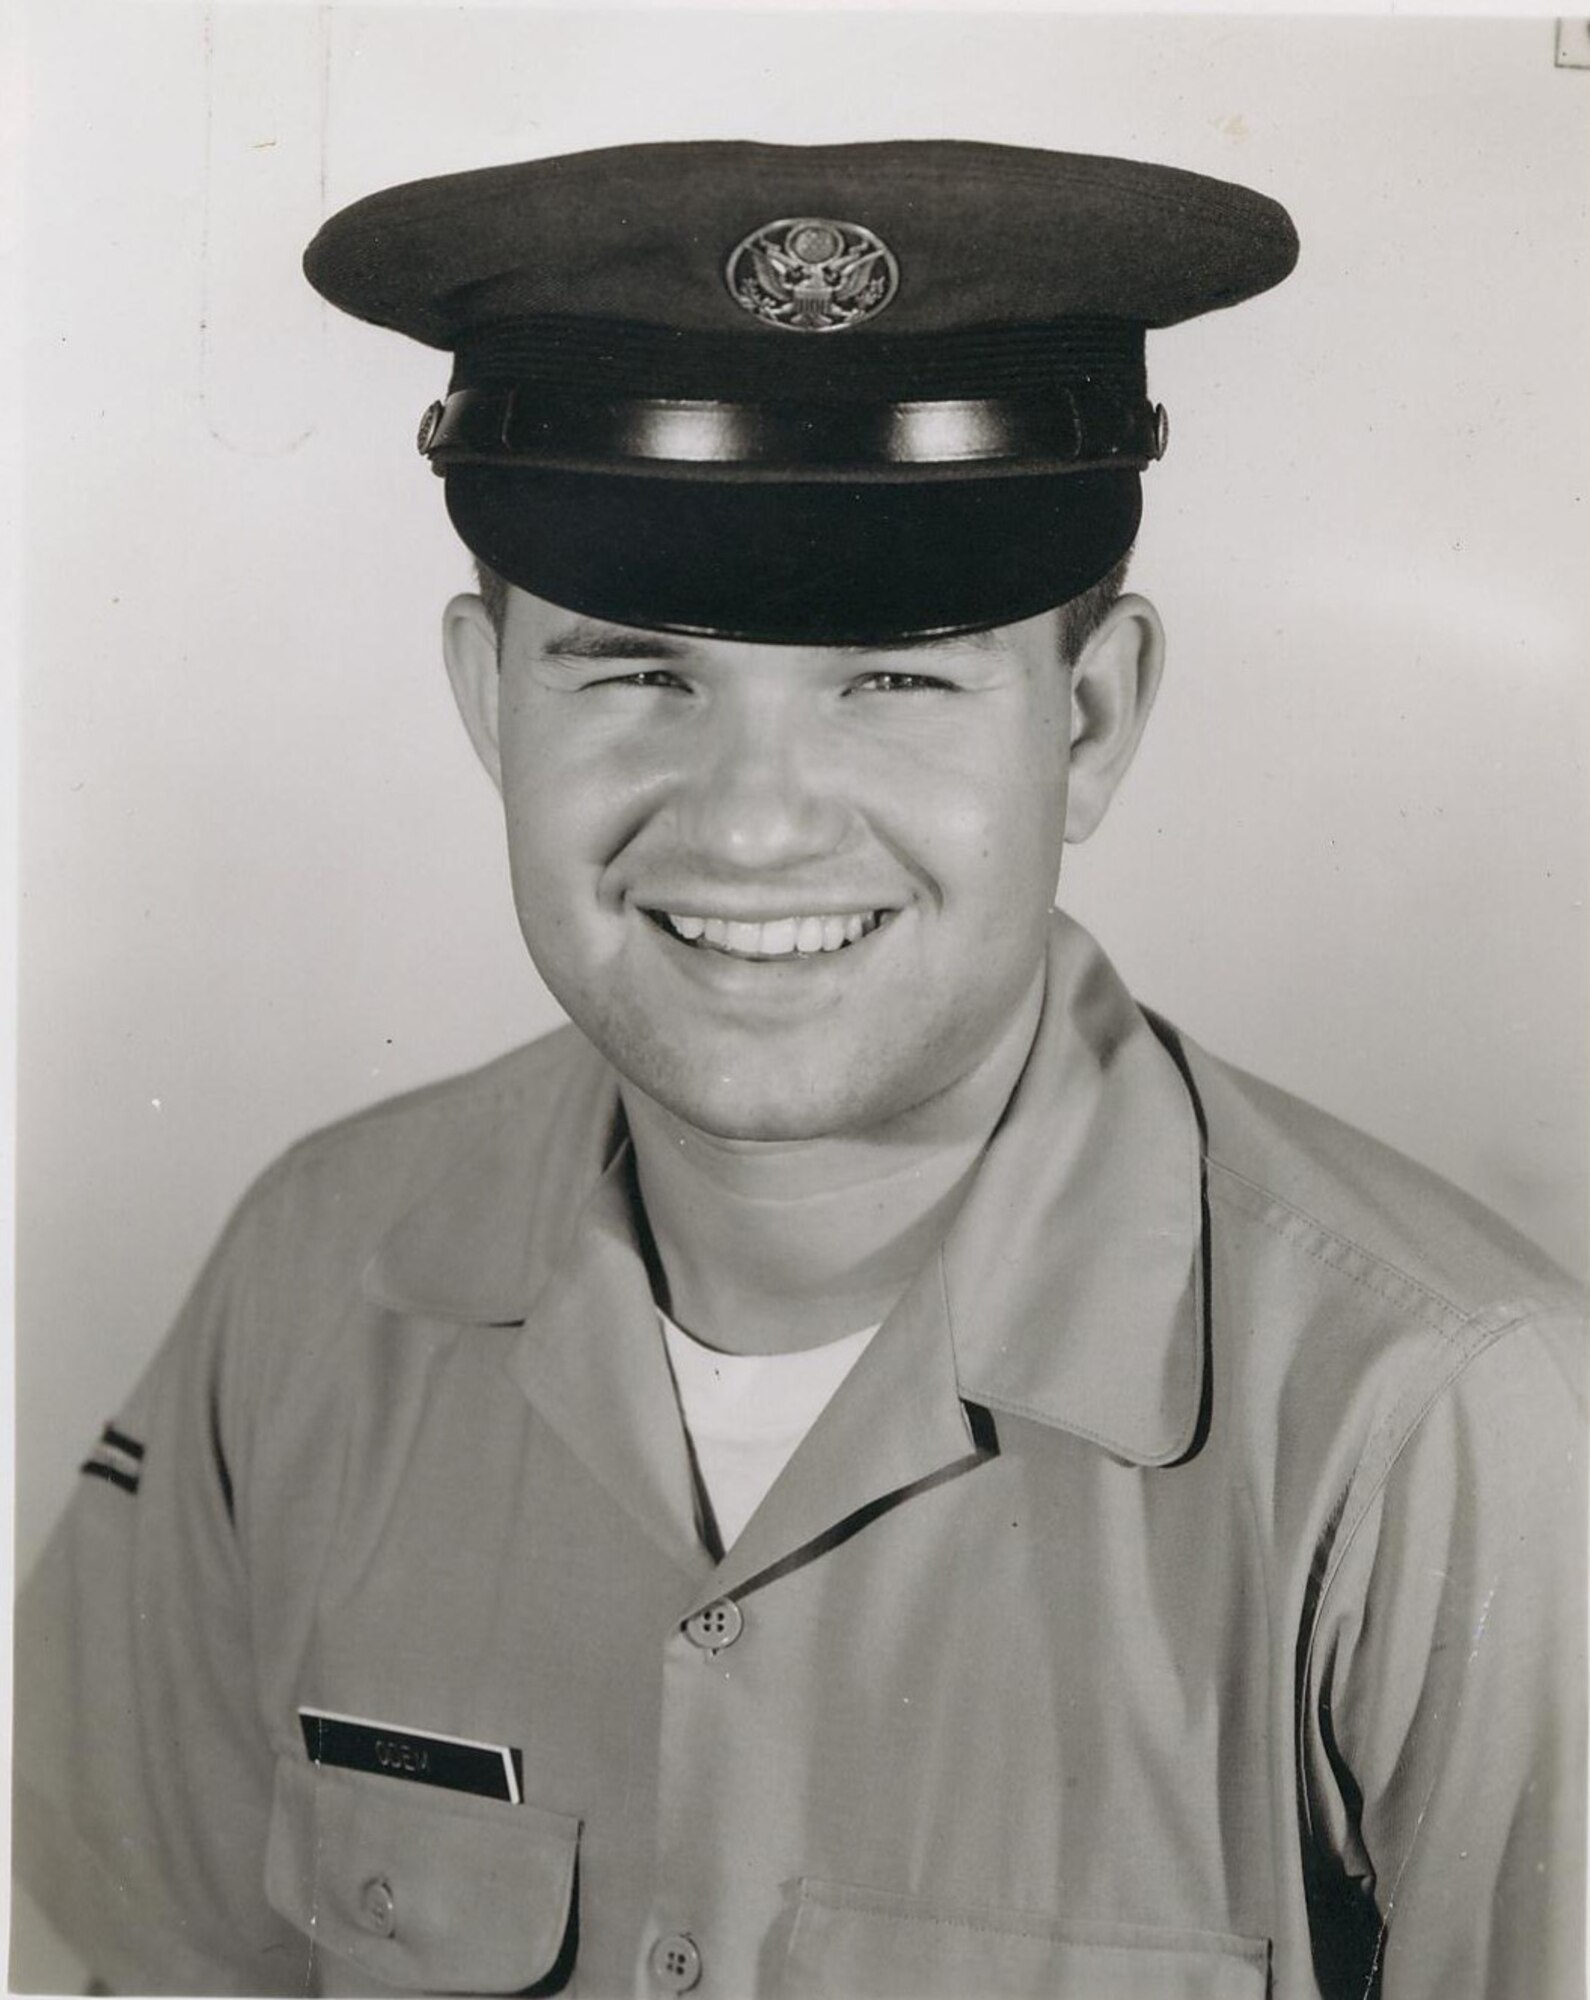 David Odem in his early days as an Air Force Airman.